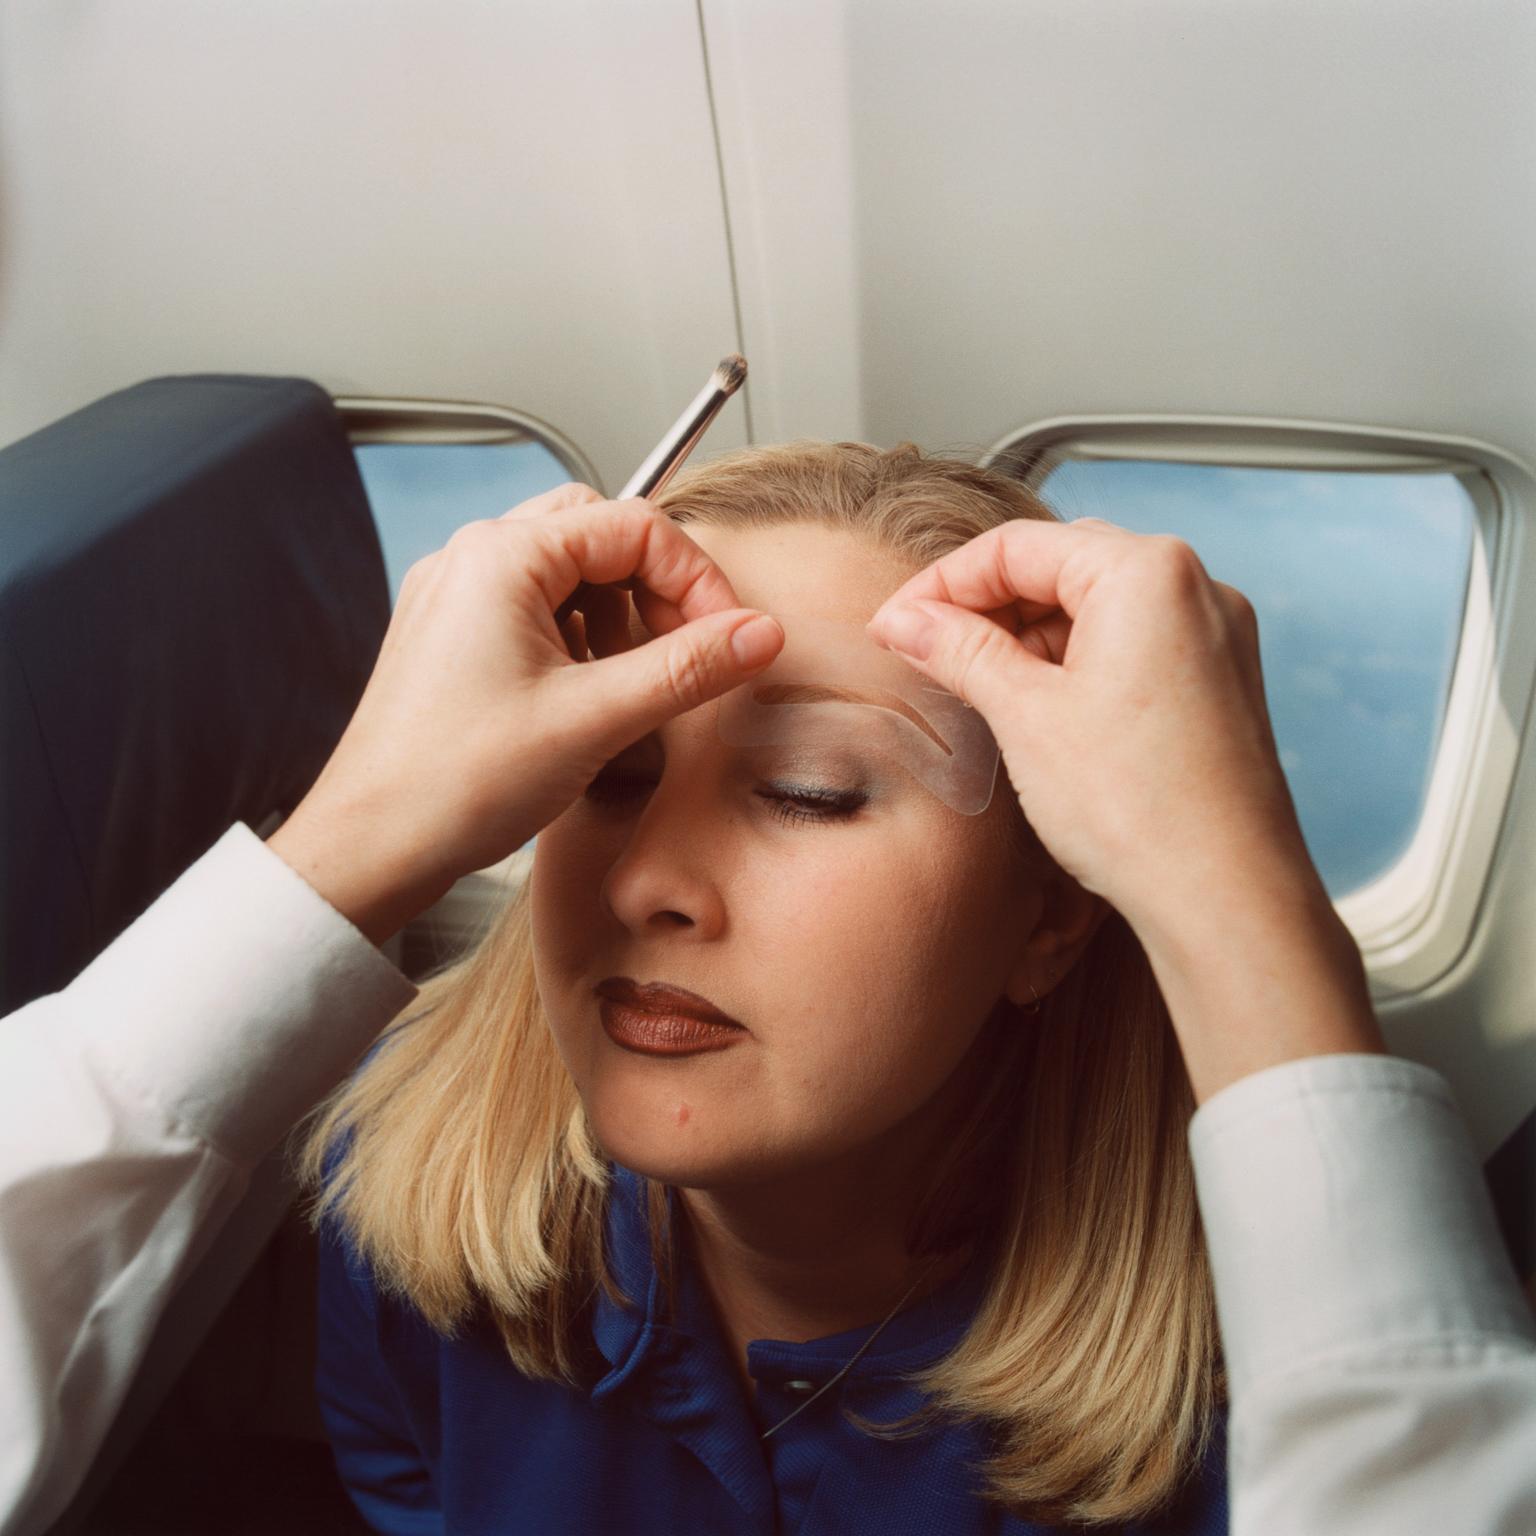 Brian Finke Figurative Photograph - Untitled (Christy, Southwest Airlines)